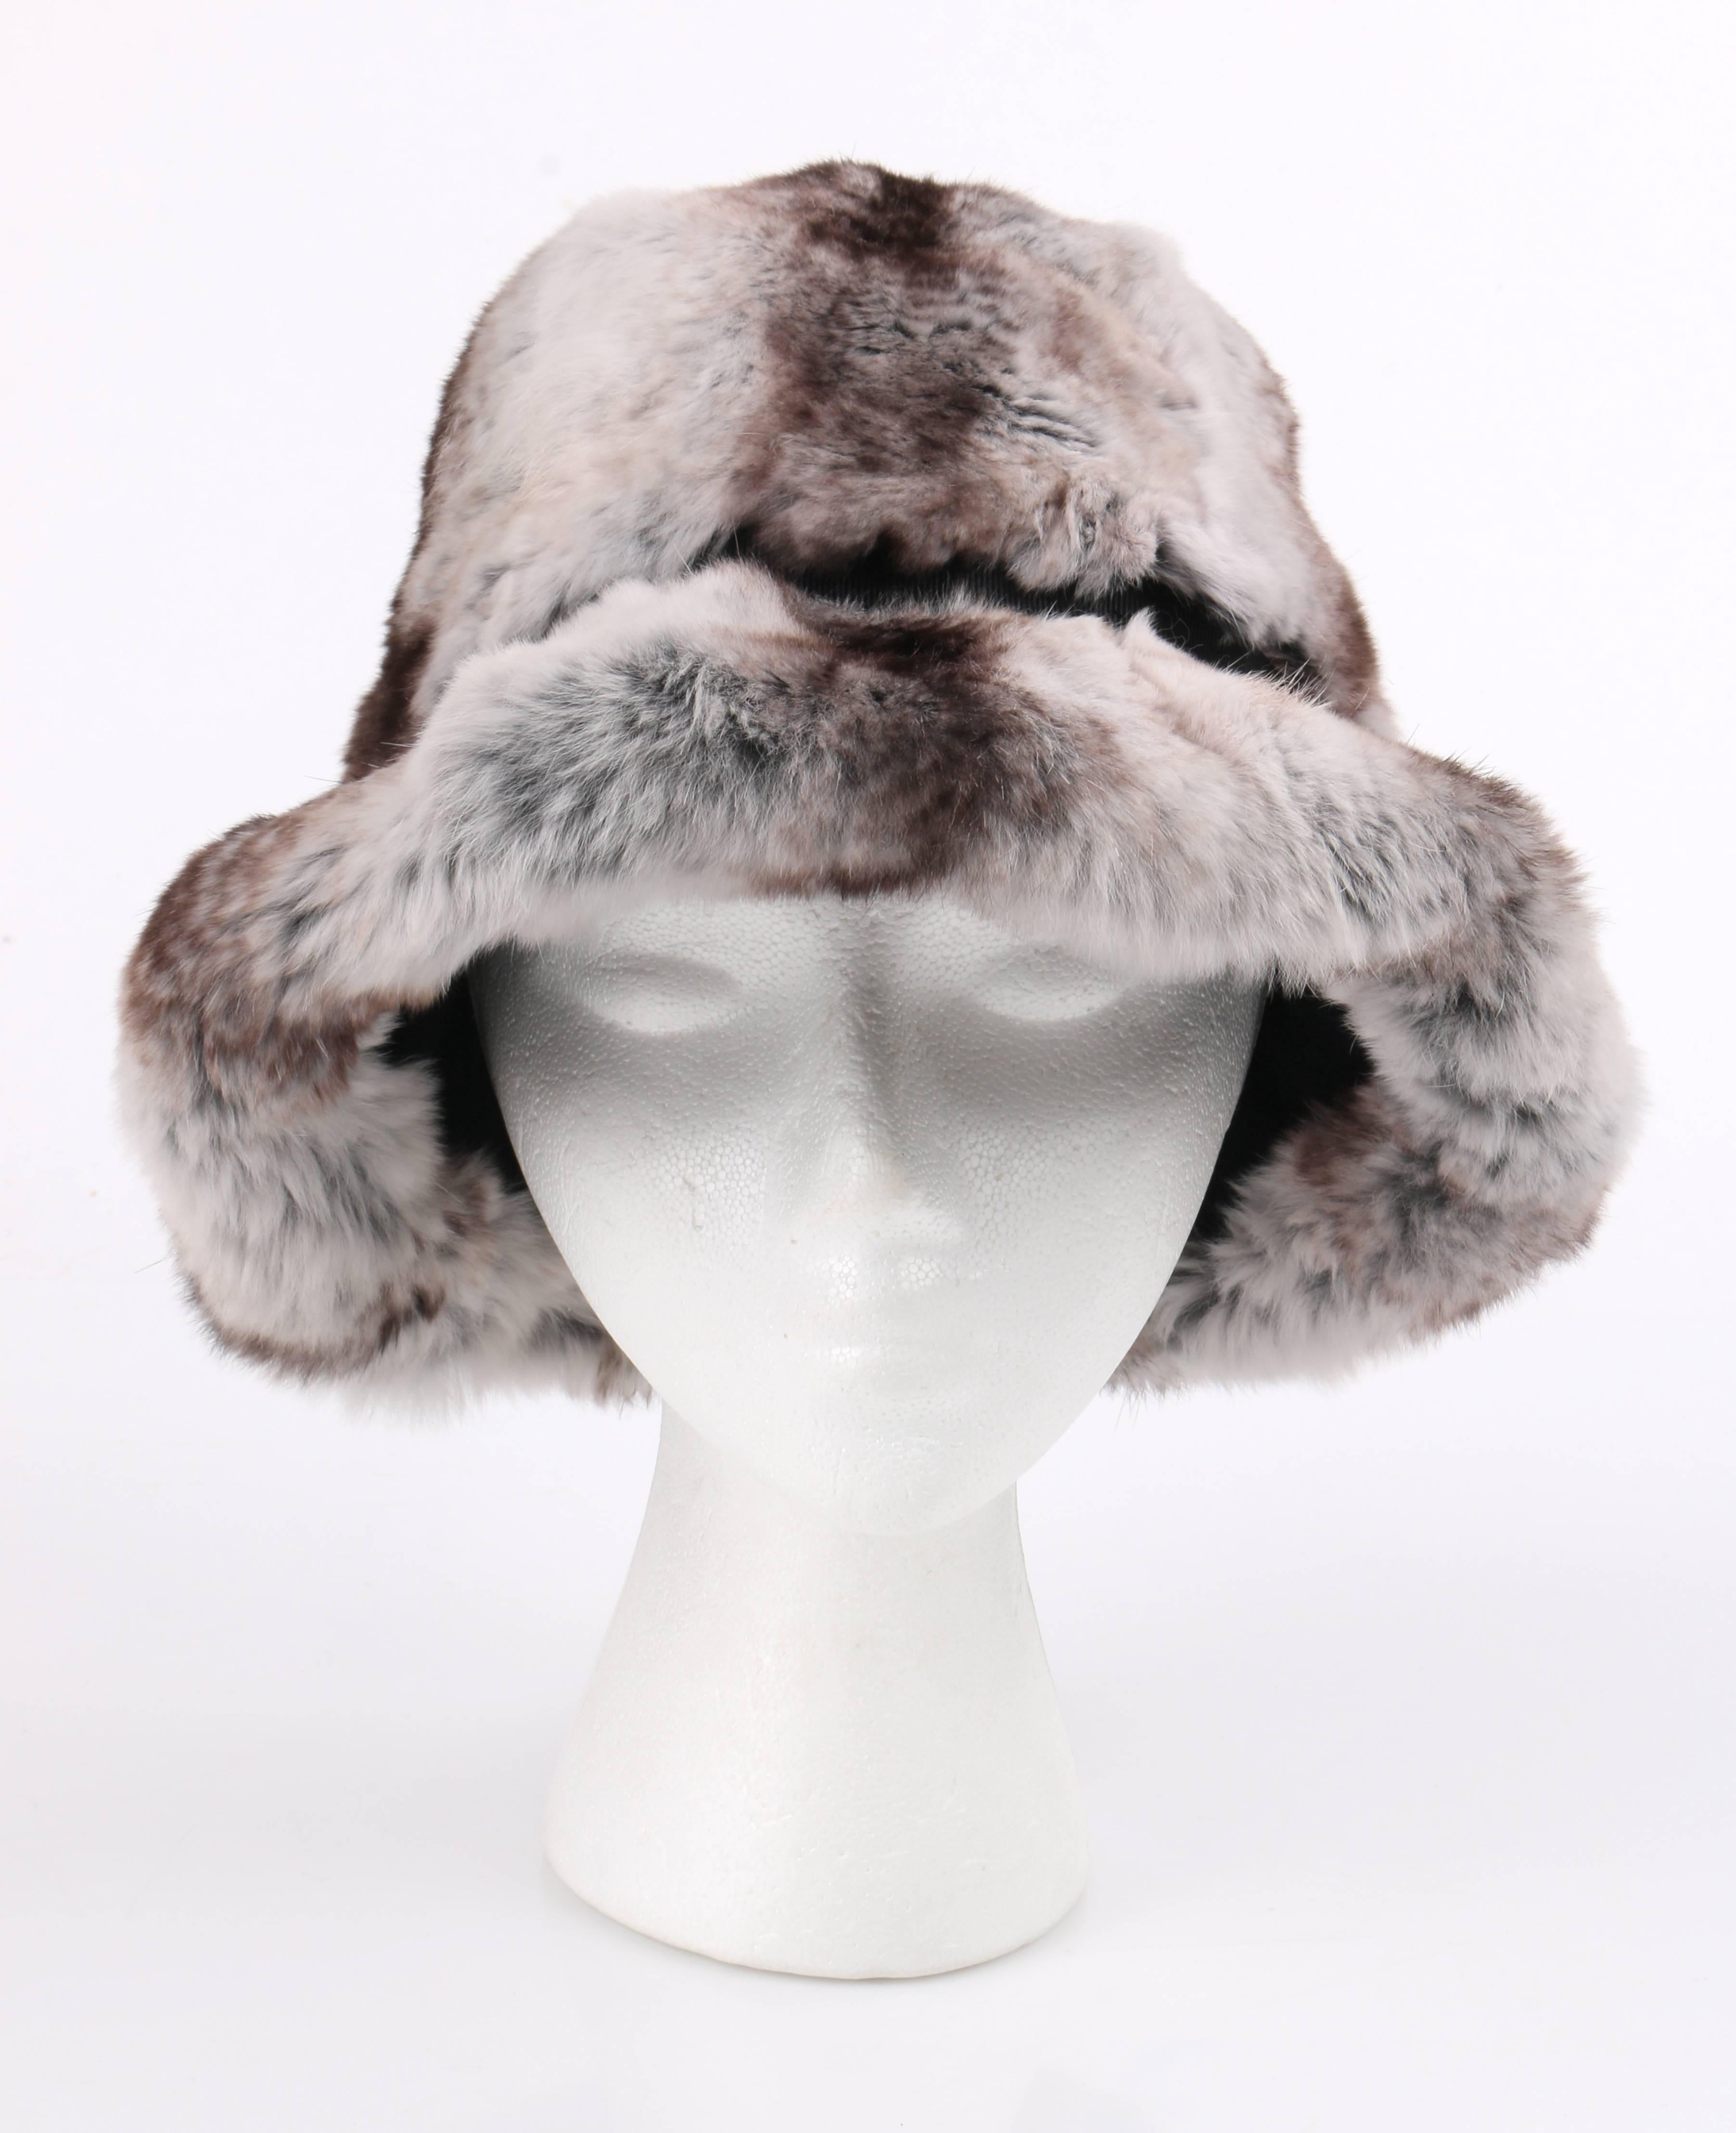 Vintage c.1960's Christian Dior Chapeaux natural gray and brown striped chinchilla fur cloche hat. Designed by Marc Bohan. Bell shaped body. Flat turned down brim. Black grosgrain ribbon hat band with wool bow at right. Black wool lining. Black